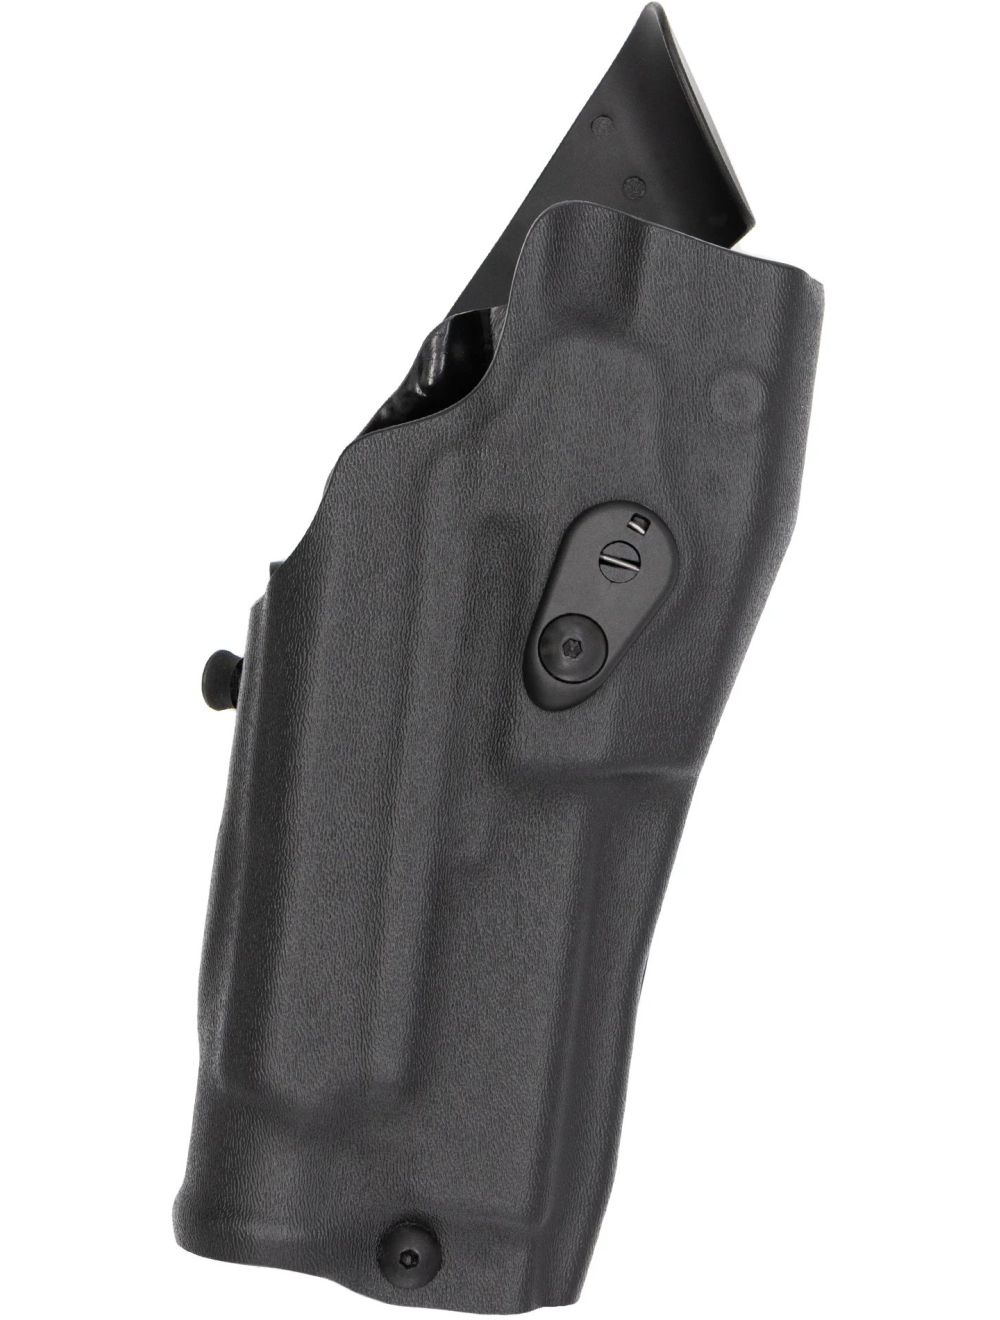 Model 6354RDSO ALS Holster w/ QLS19 Fork for Glock 19 MOS w/ Light